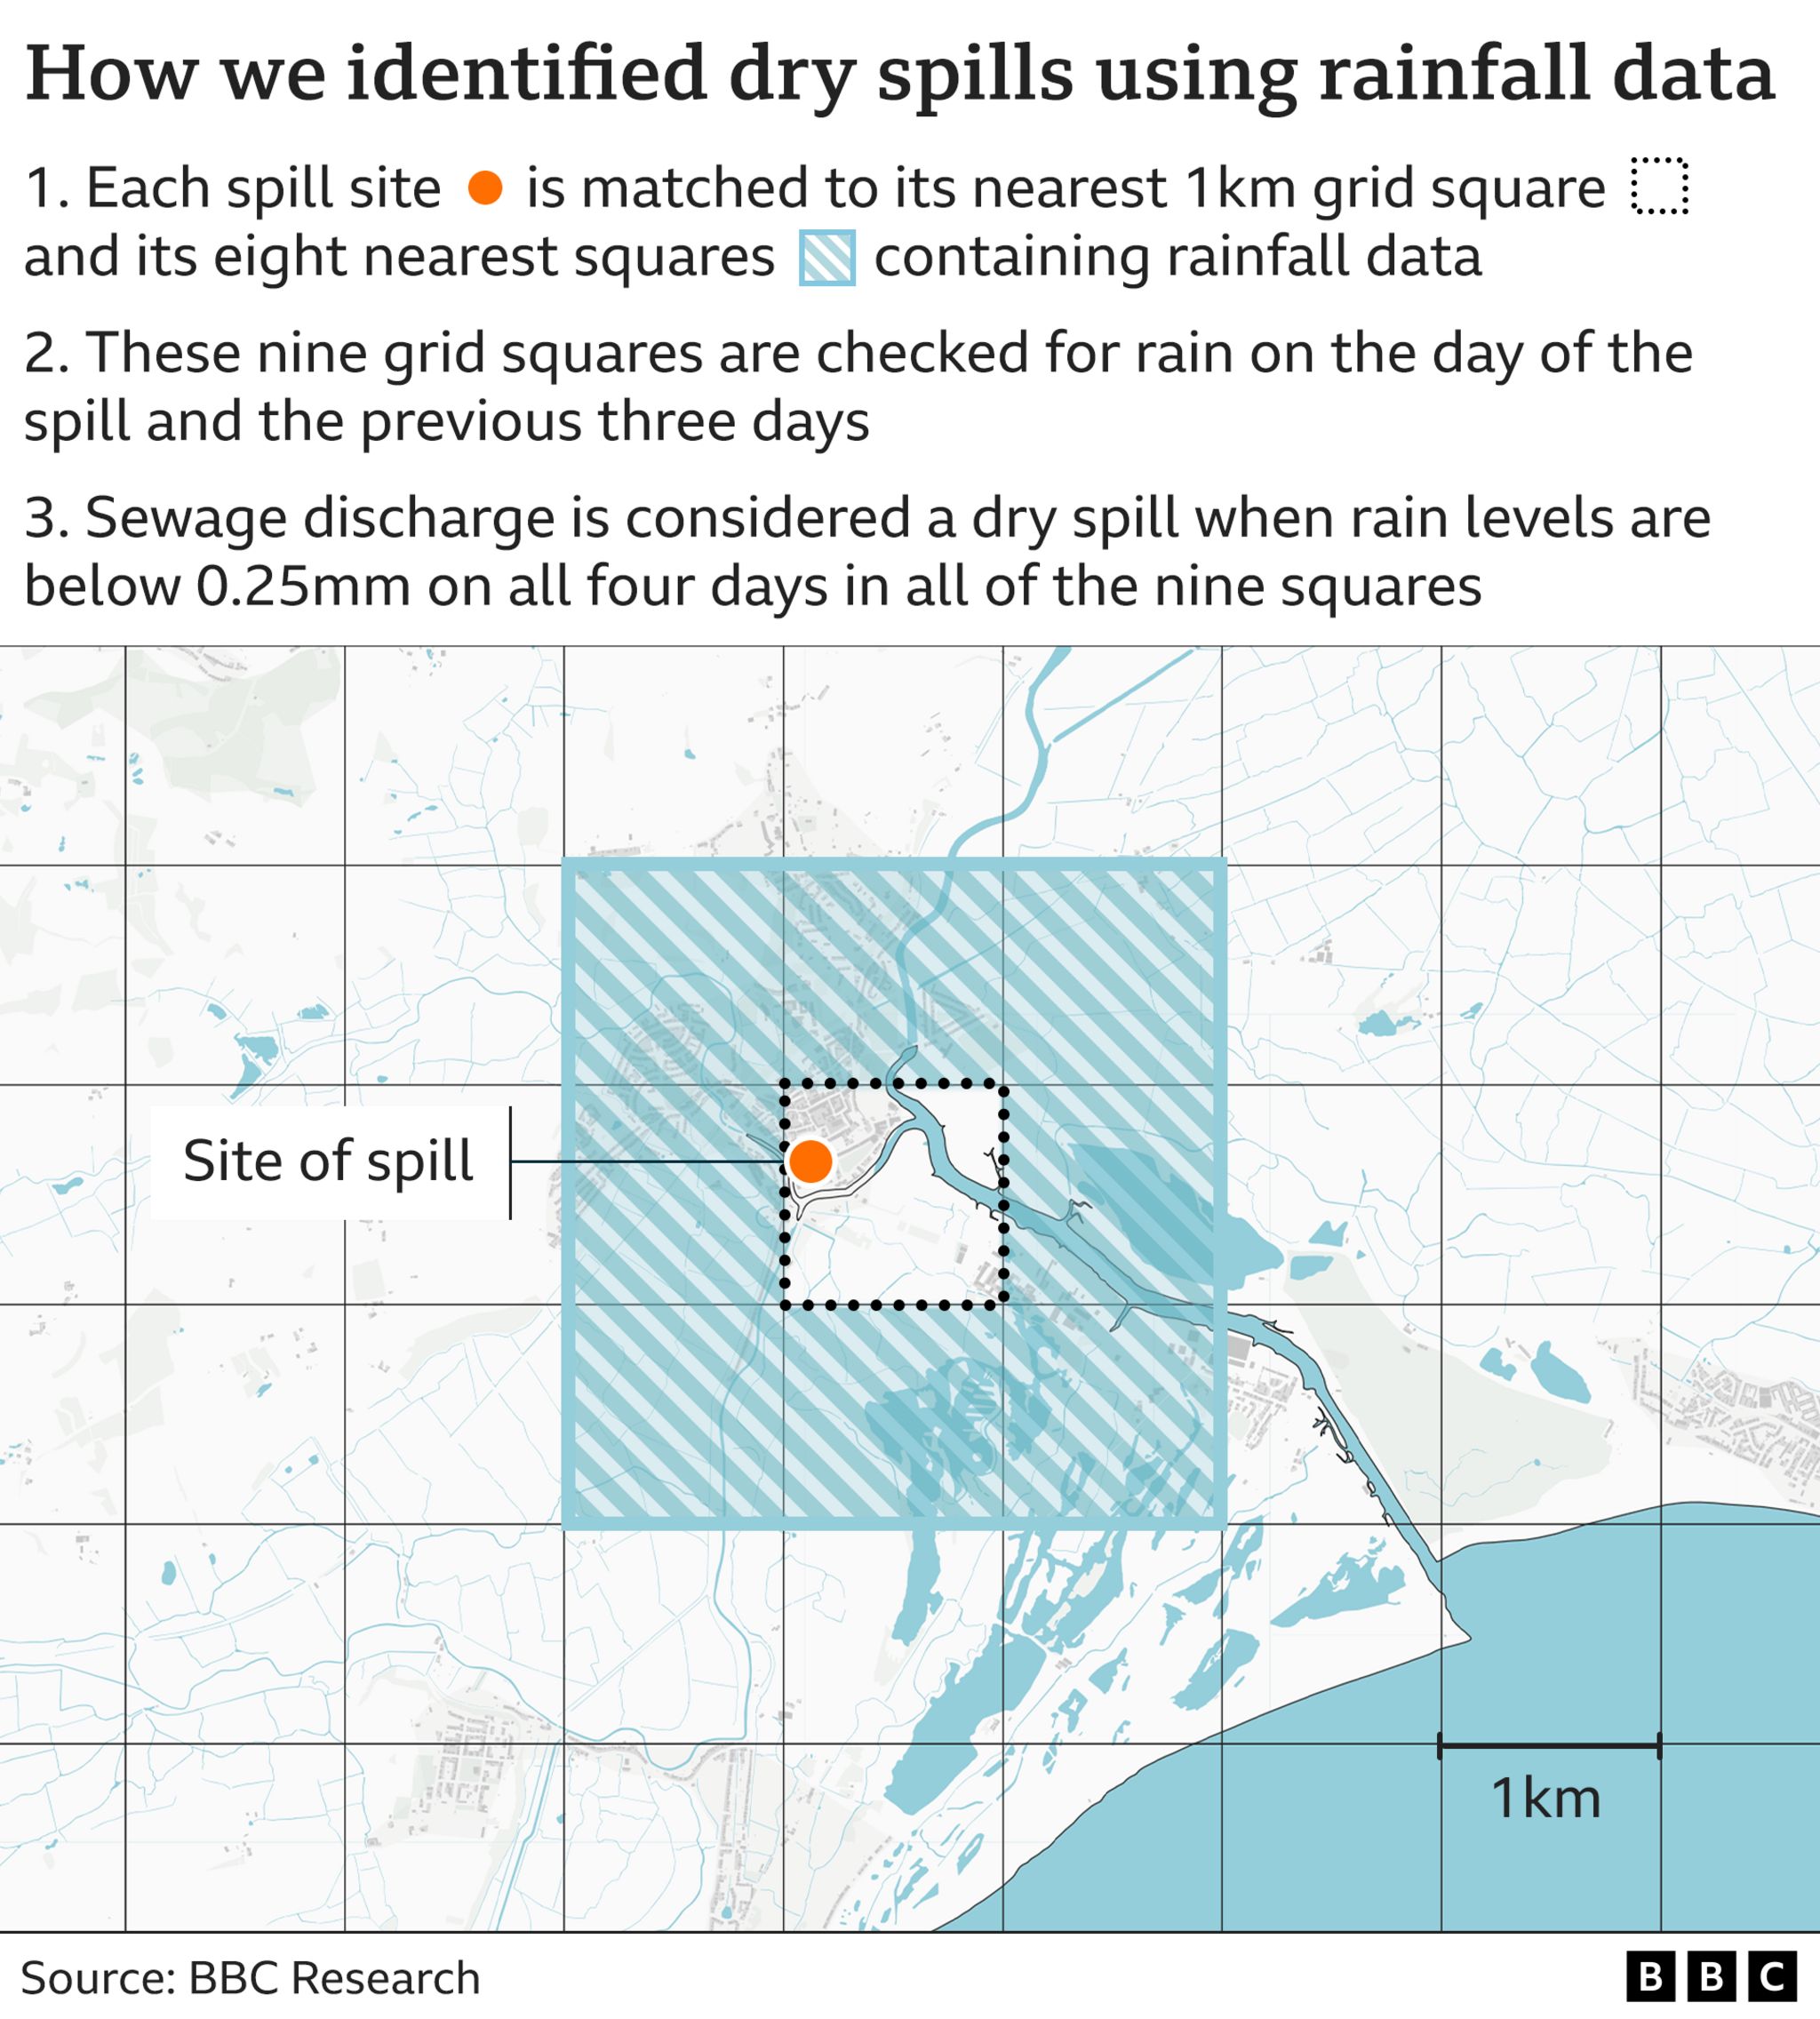 Graphic showing how the BBC identified dry spills: 1) Each spill site is matched to its nearest 1km grid square and its eight nearest squares containing rainfall data 2) The nine grid squares are checked for rain on the day of the spill and the previous three days 3) Sewage discharge is considered a dry spill when rain levels are below 0.25mm on all four days in all of the nine squares